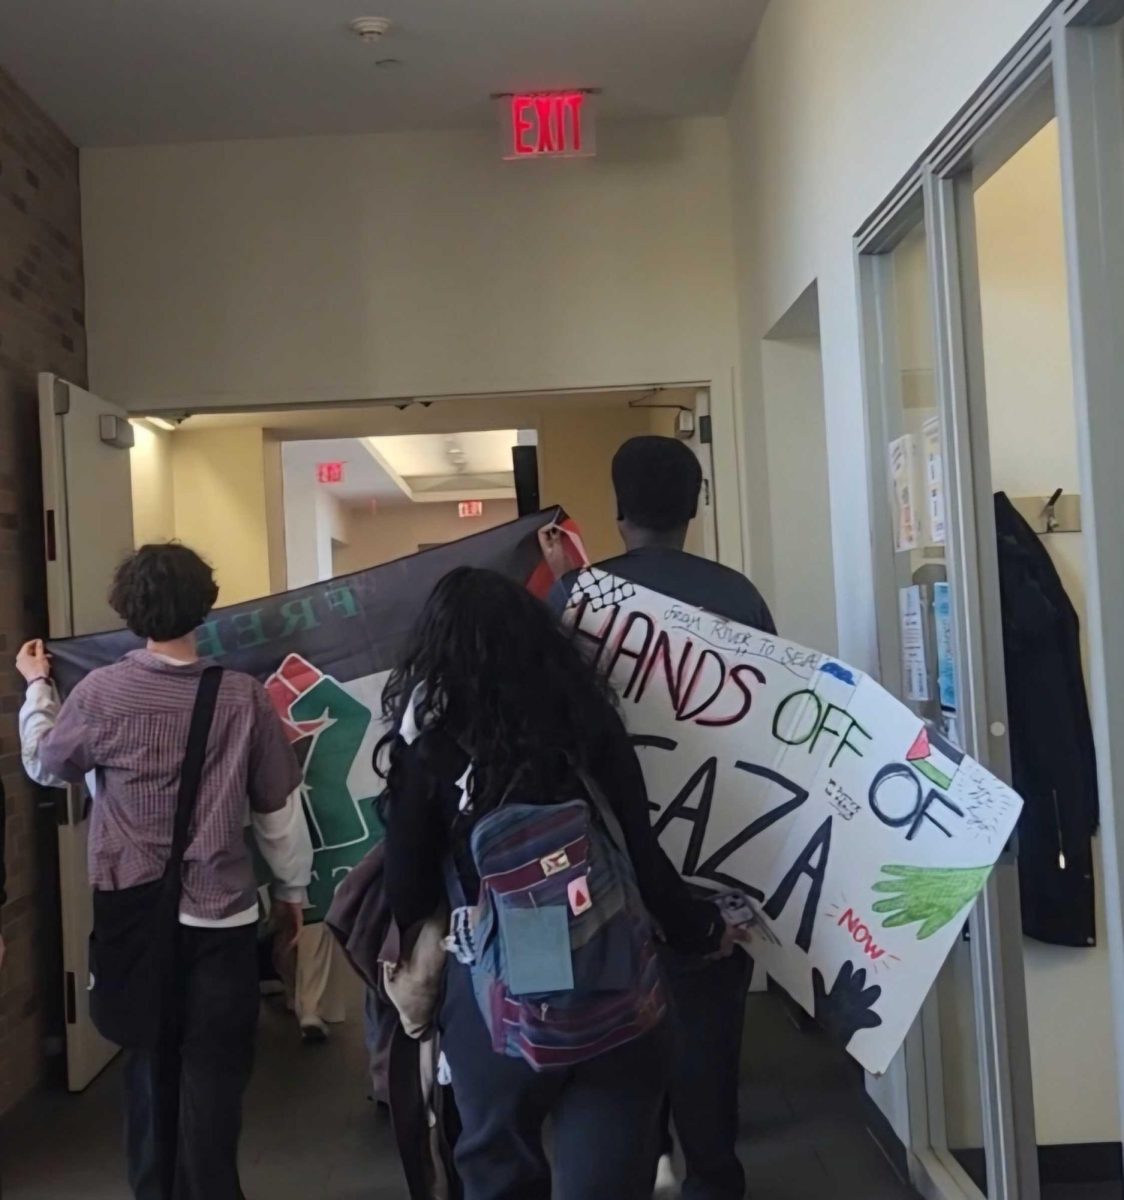 SJU students and faculty walked through campus and held signs in protest of the on-campus Starbucks and Burger King.
Torch Photo / Malak Kassem